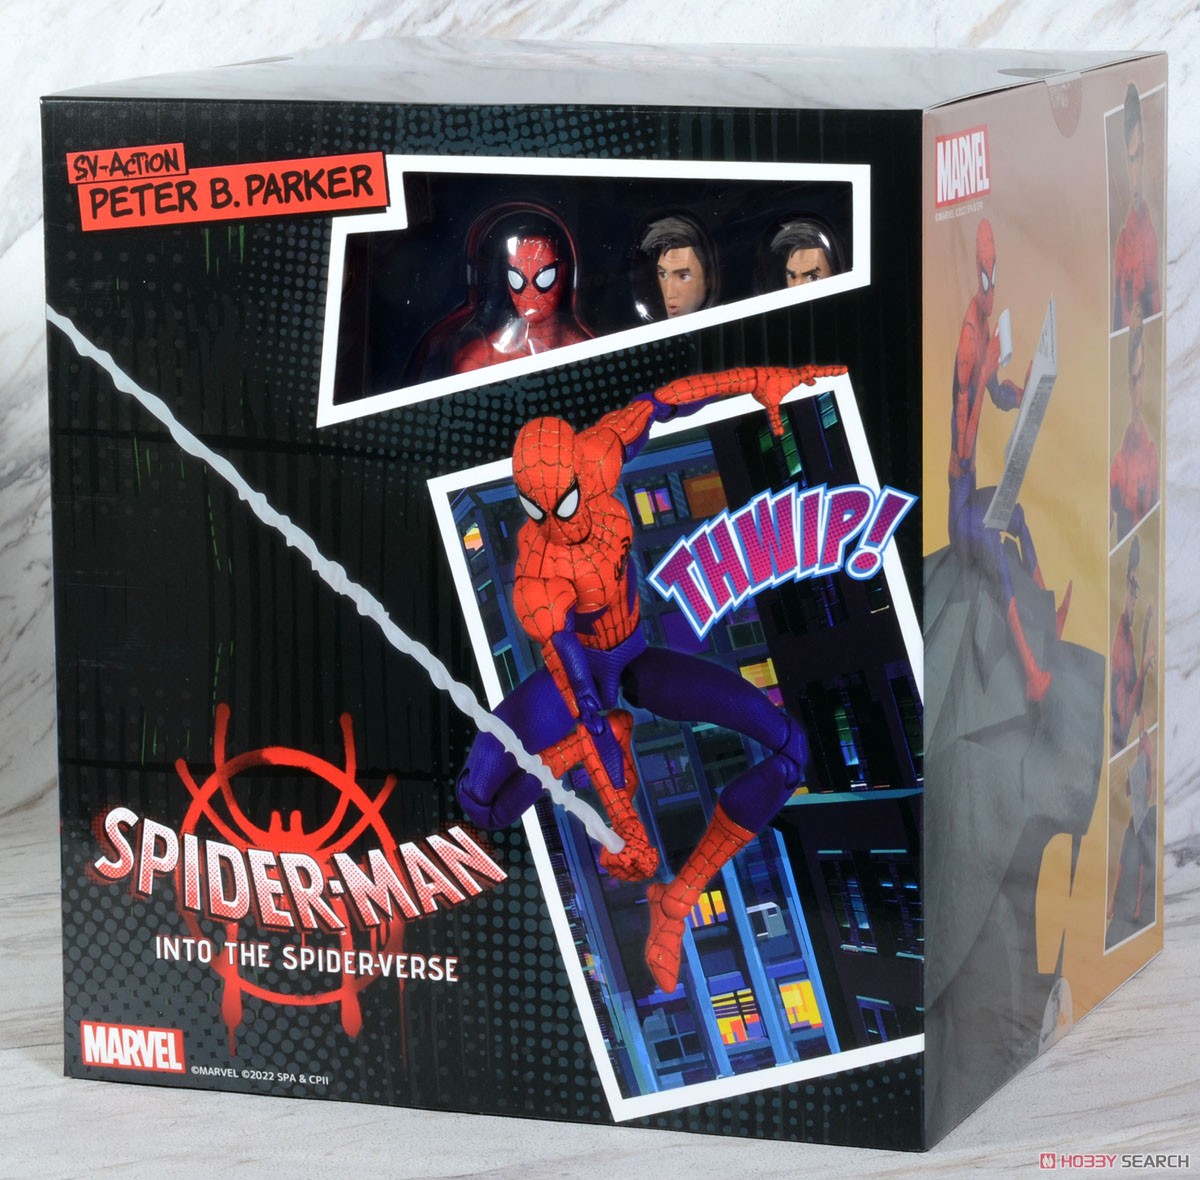 Spider-Man: Into the Spider-Verse SV Action Peter B. Parker / Spider-Man DX Ver. (Completed) Package1